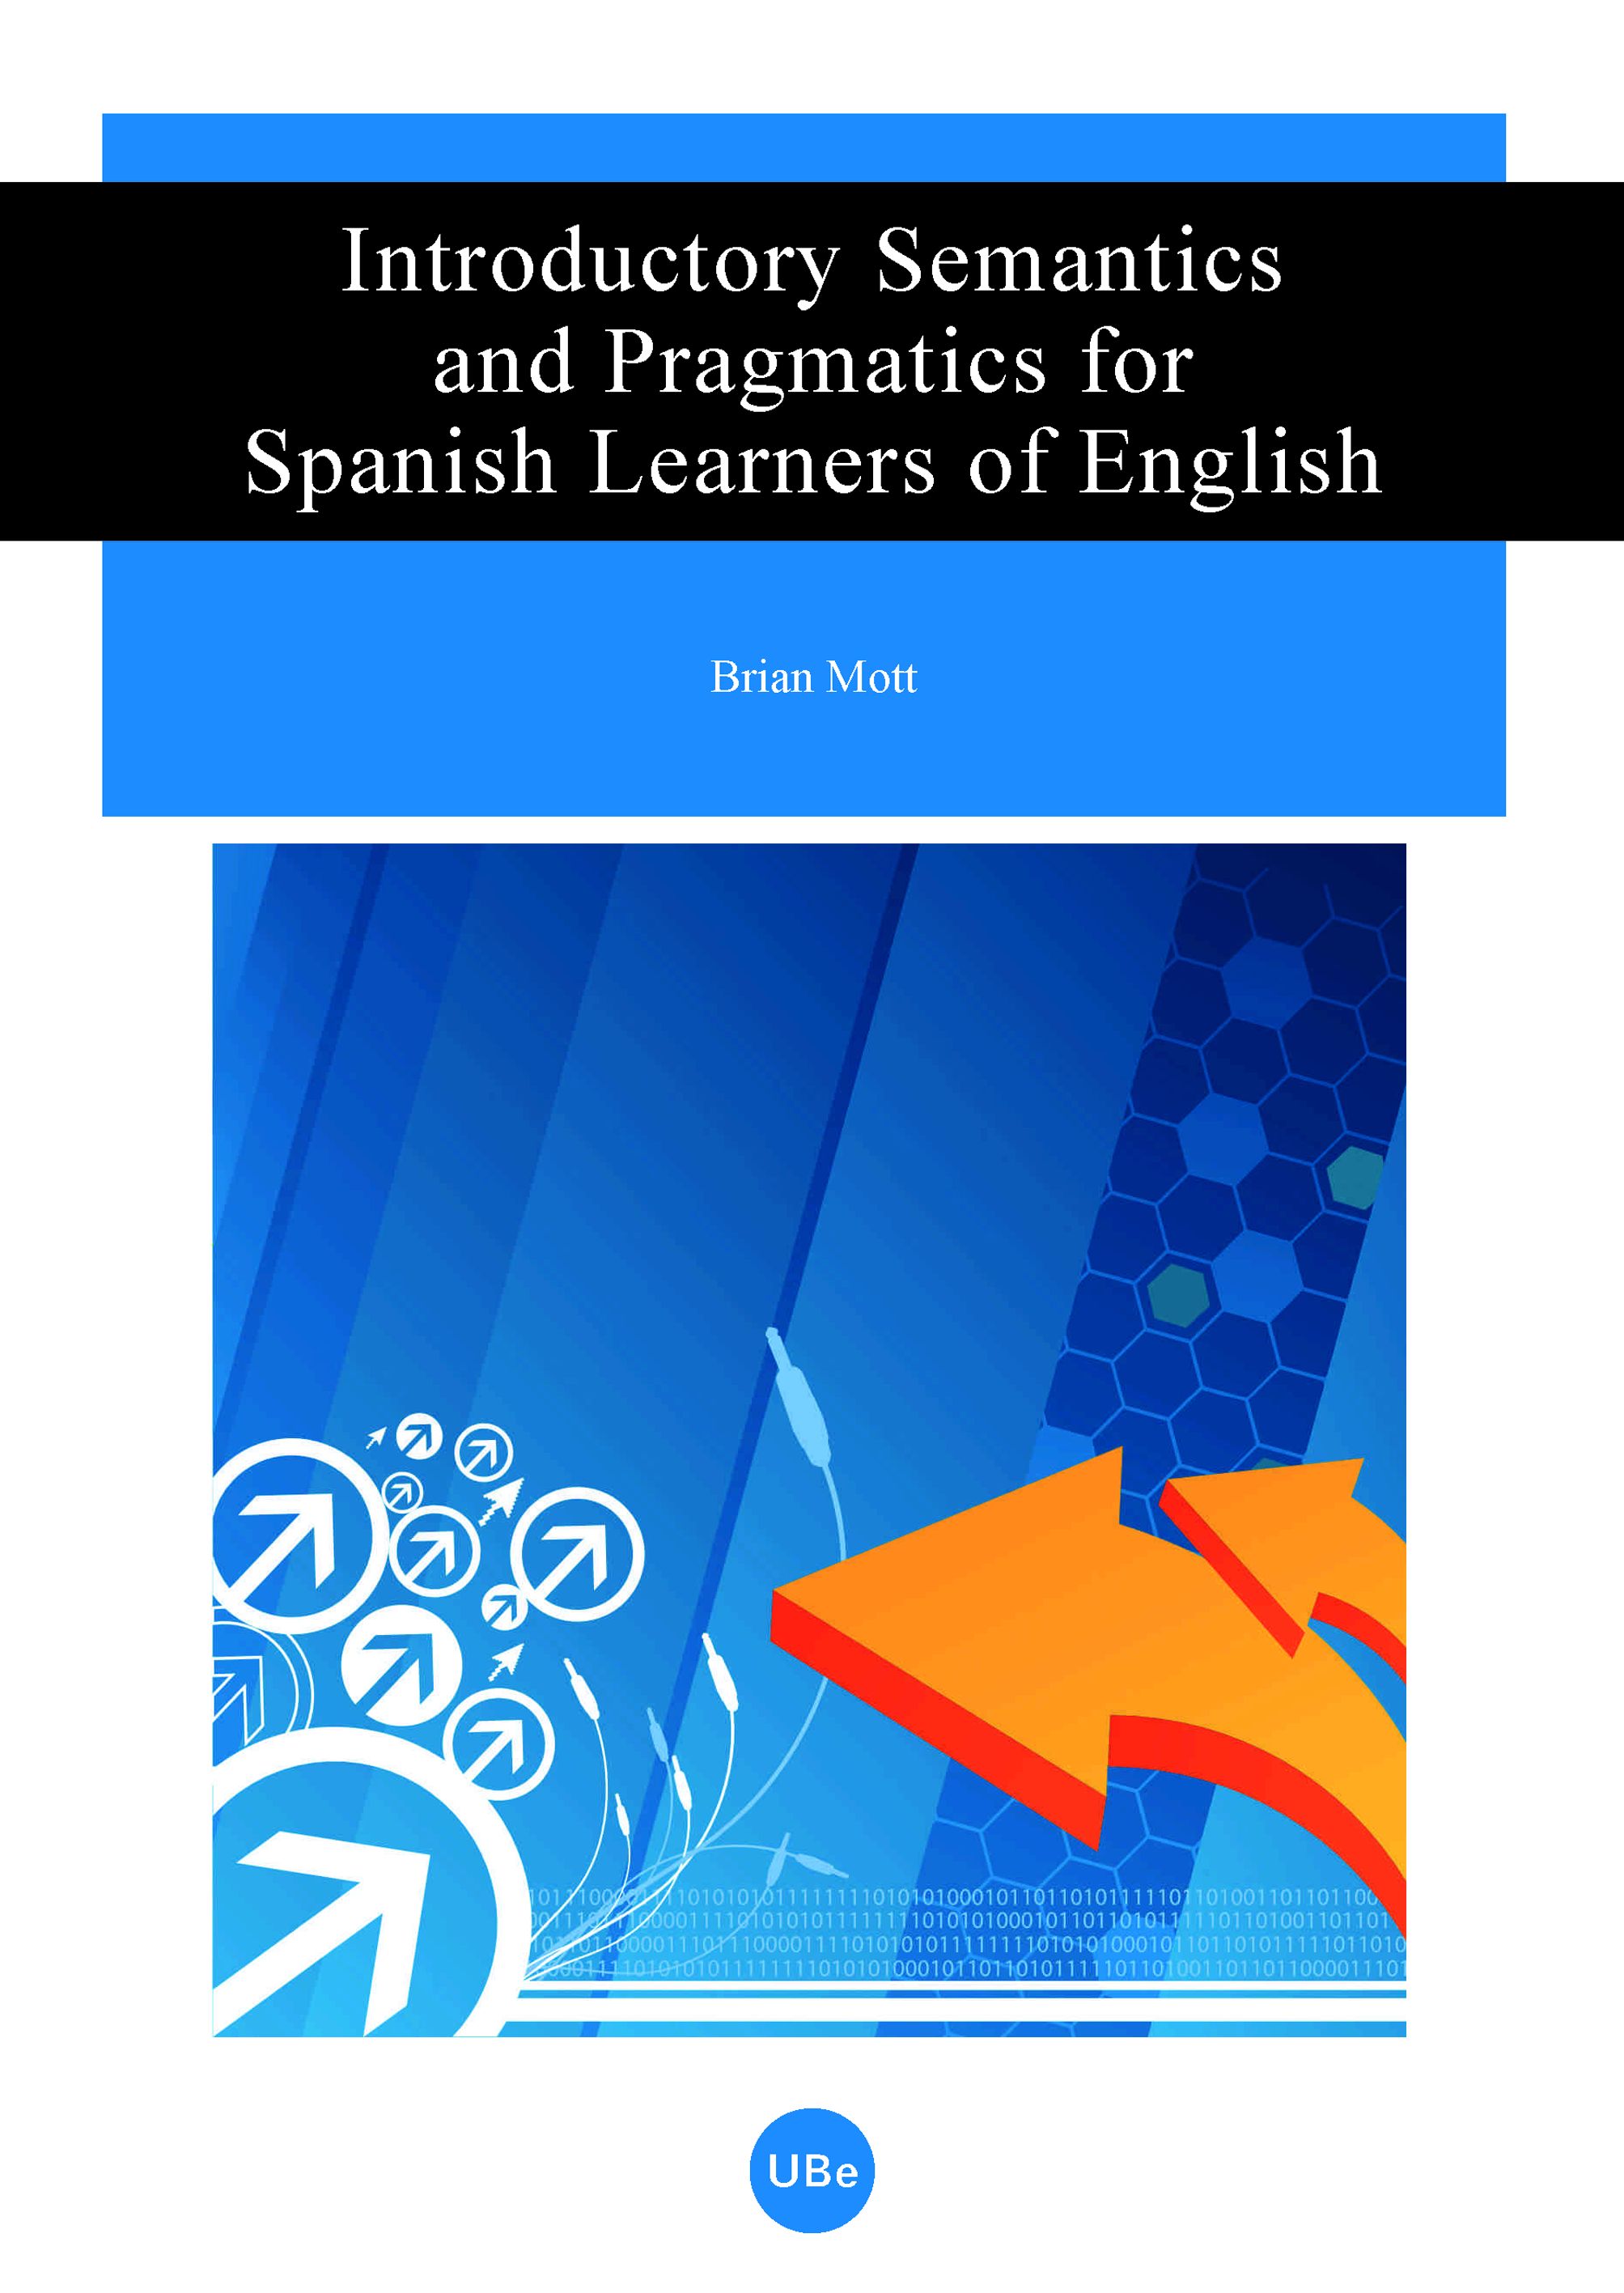 Introductory Semantics and Pragmatics for Spanish Learners of English (9788447533459)